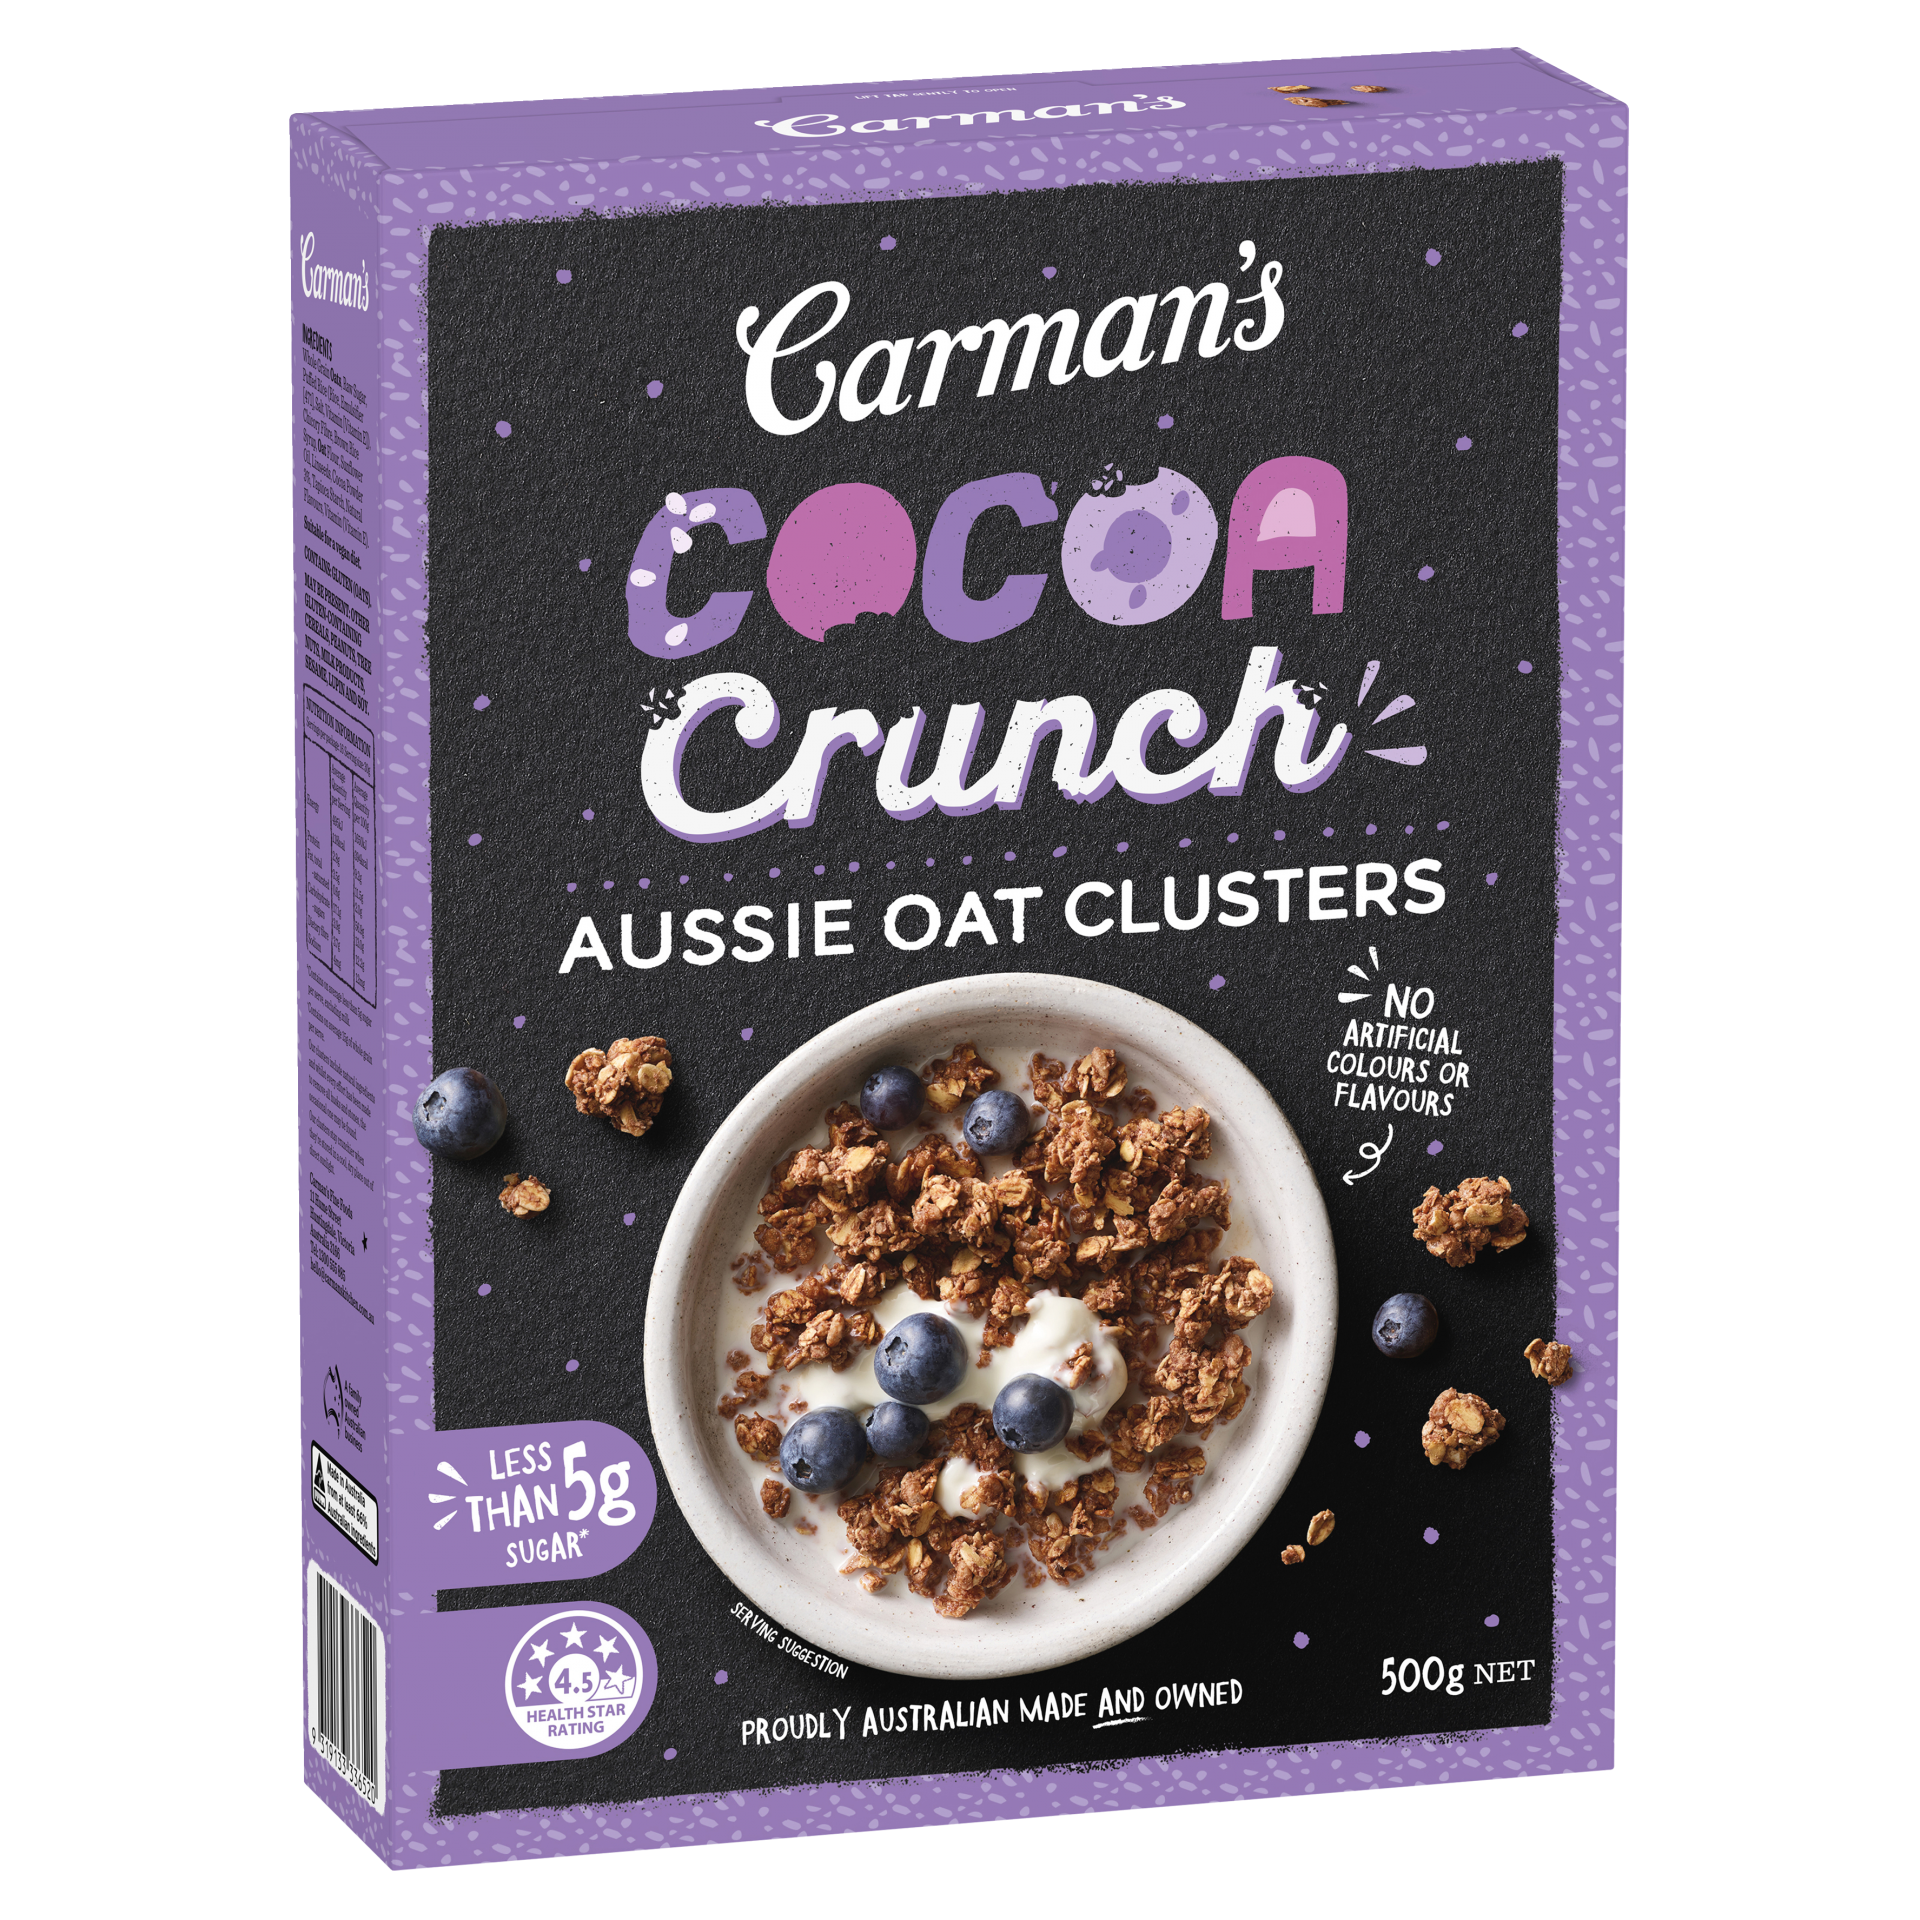 Cocoa Crunch Aussie Oat Clusters